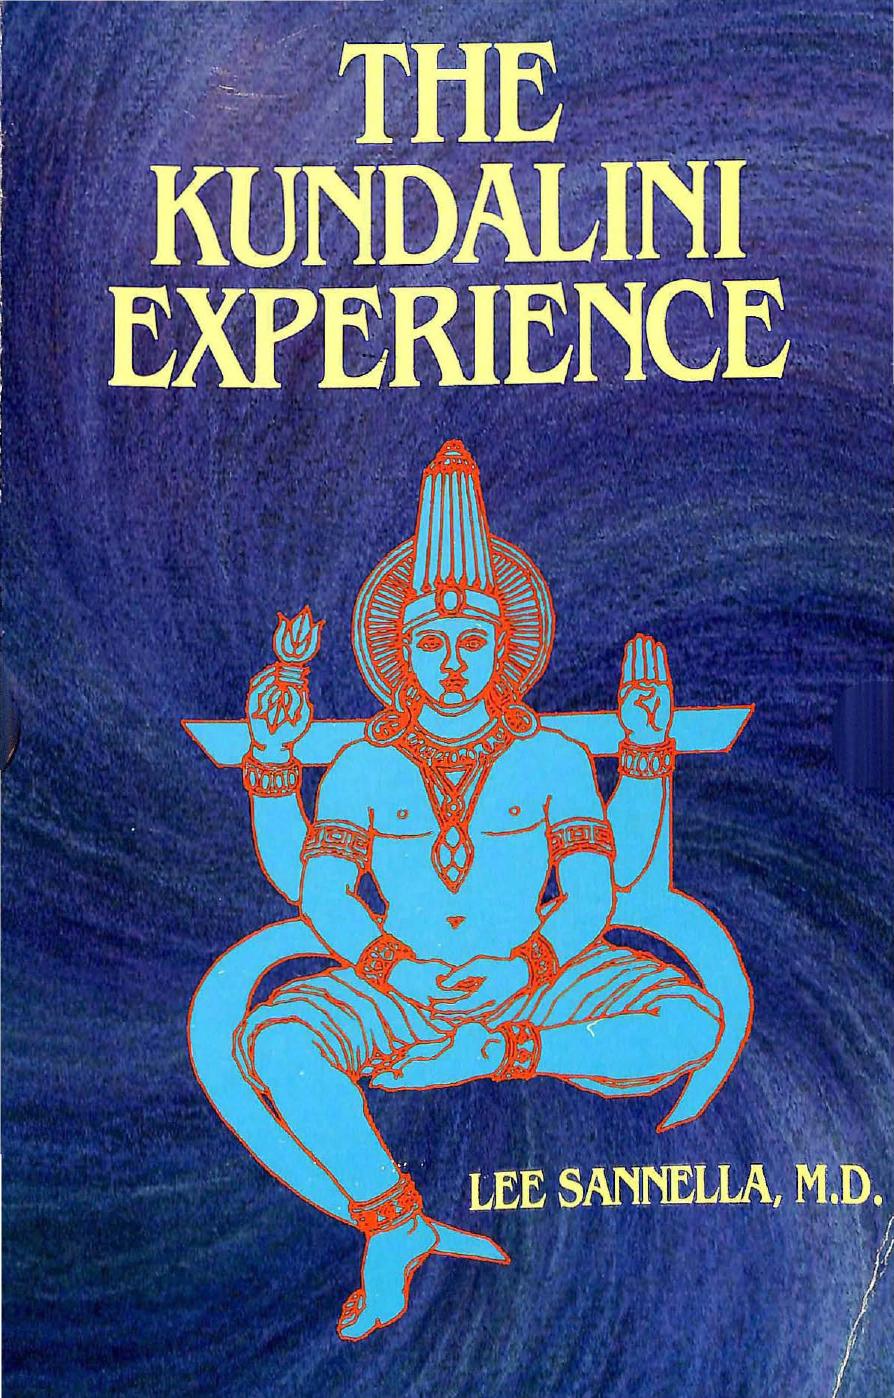 The Kundalini Experience: Psychosis or Transcendence?